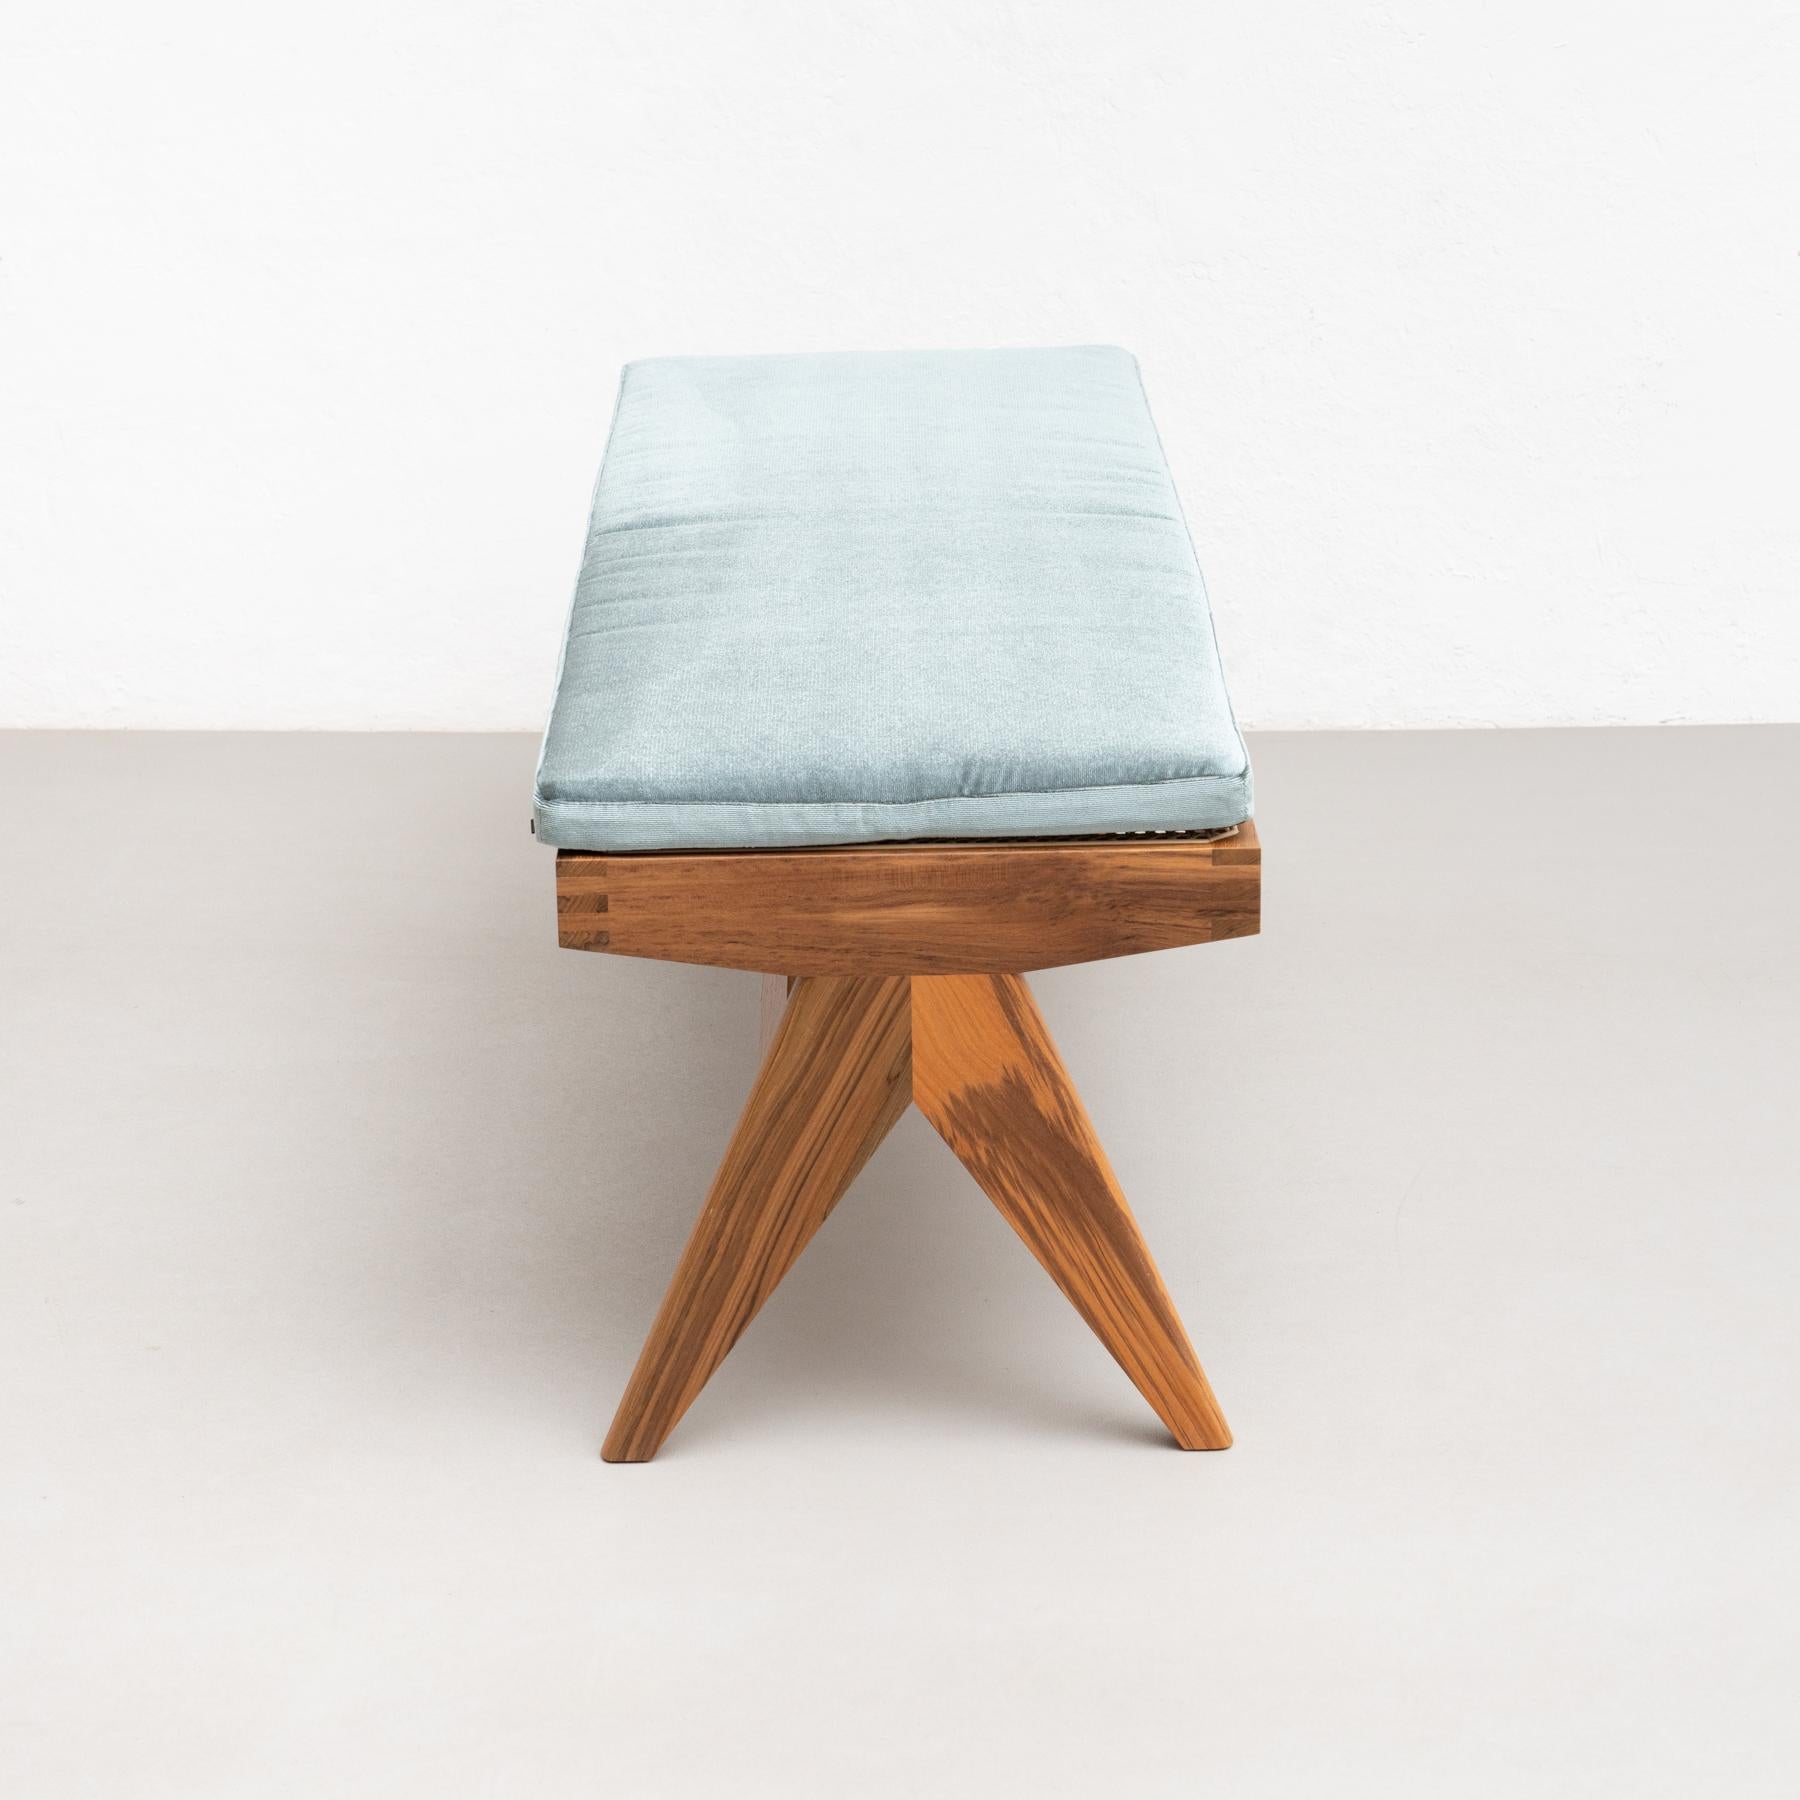 Pierre Jeanneret Civil Bench, Wood and Woven Viennese Cane by Cassina In New Condition For Sale In Barcelona, Barcelona